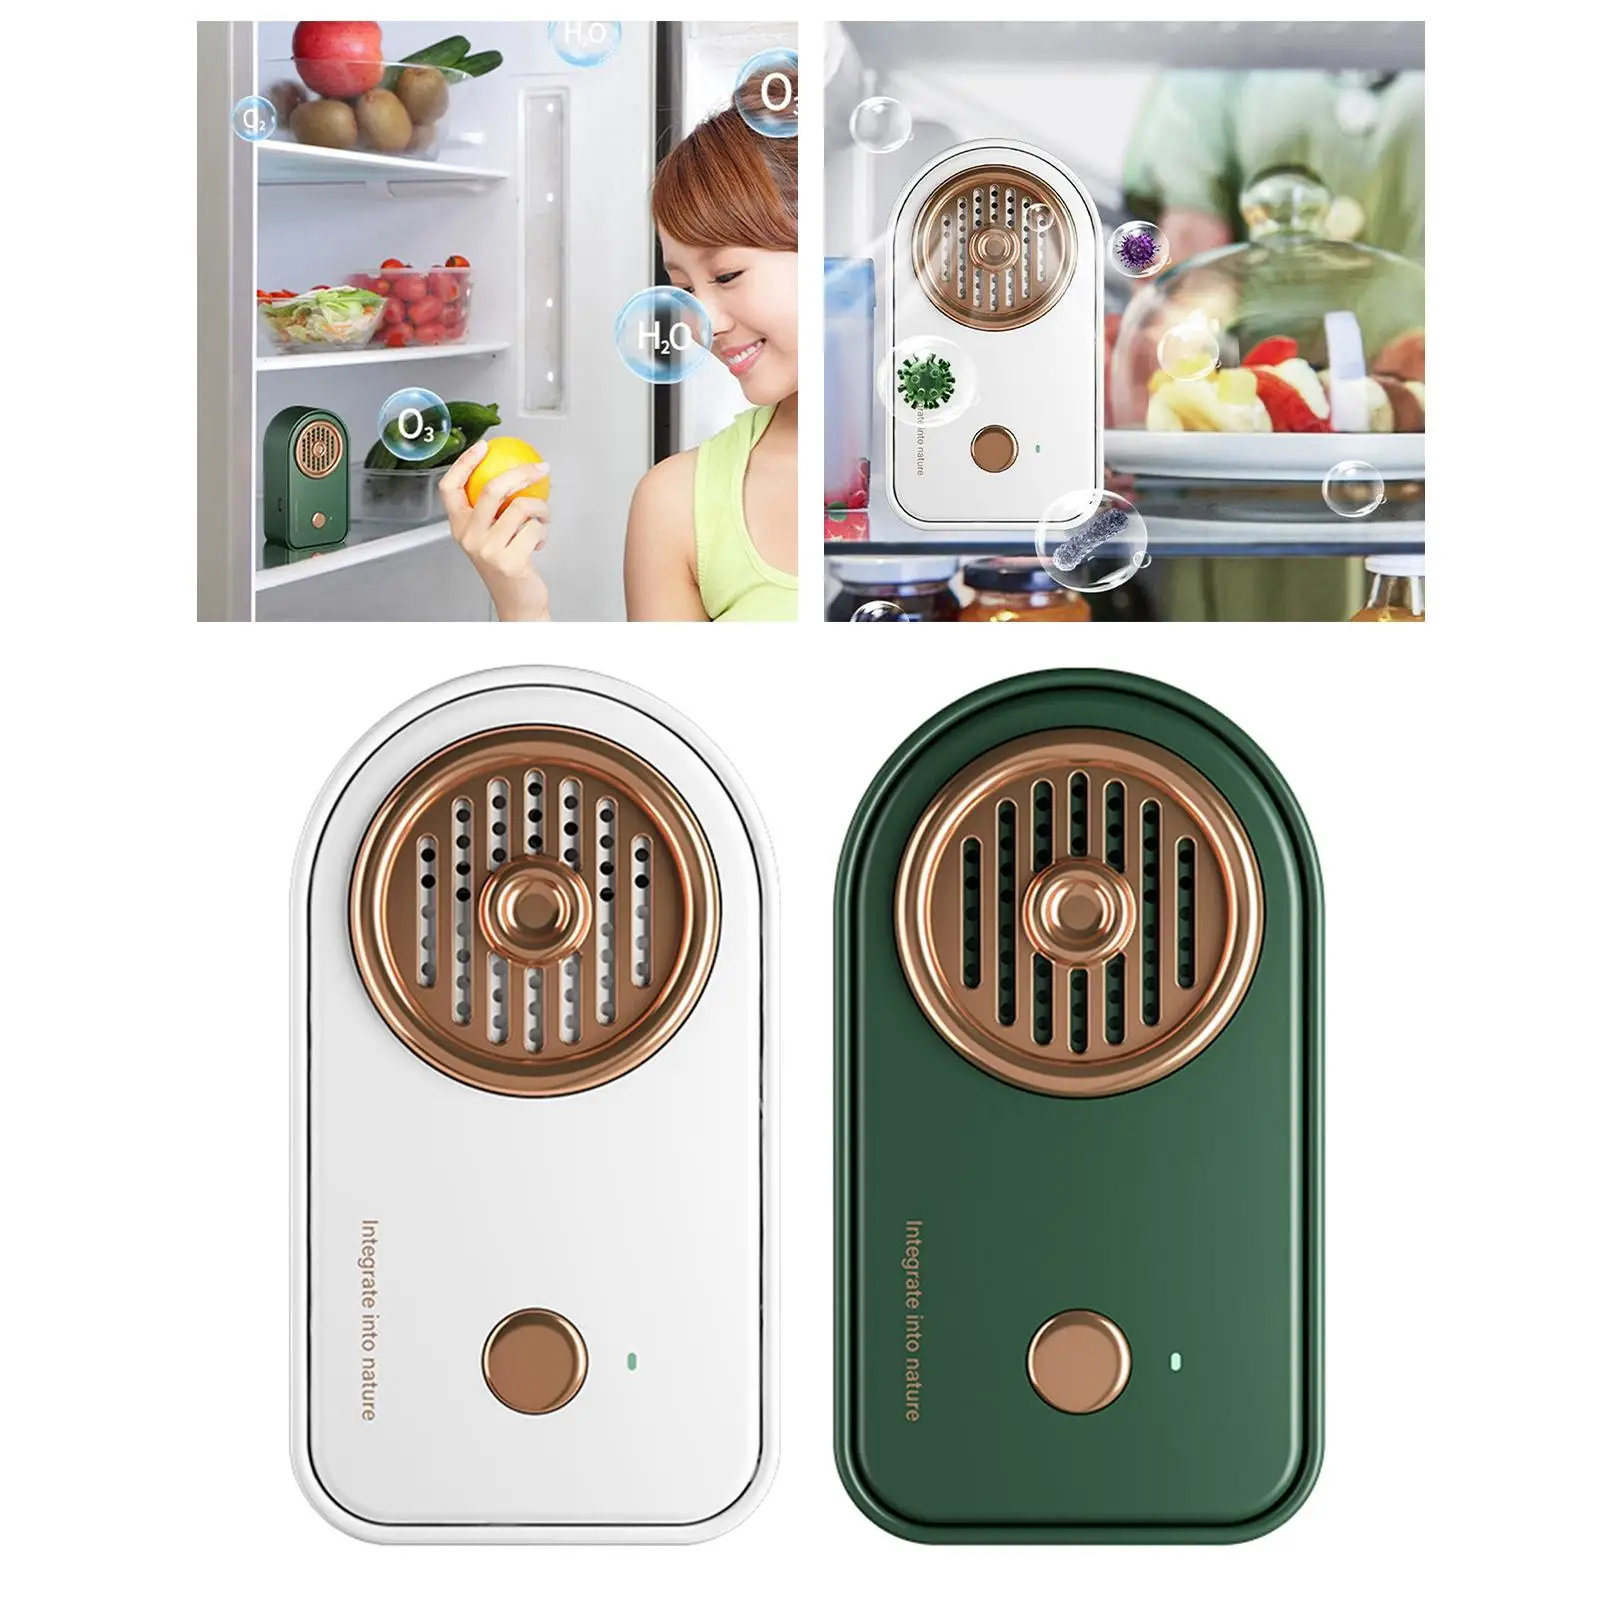 Odor Remover Vegetables Disinfection Air Ozonator Meat for Dinning Room Kitchen,House Refrigerator Bathroom